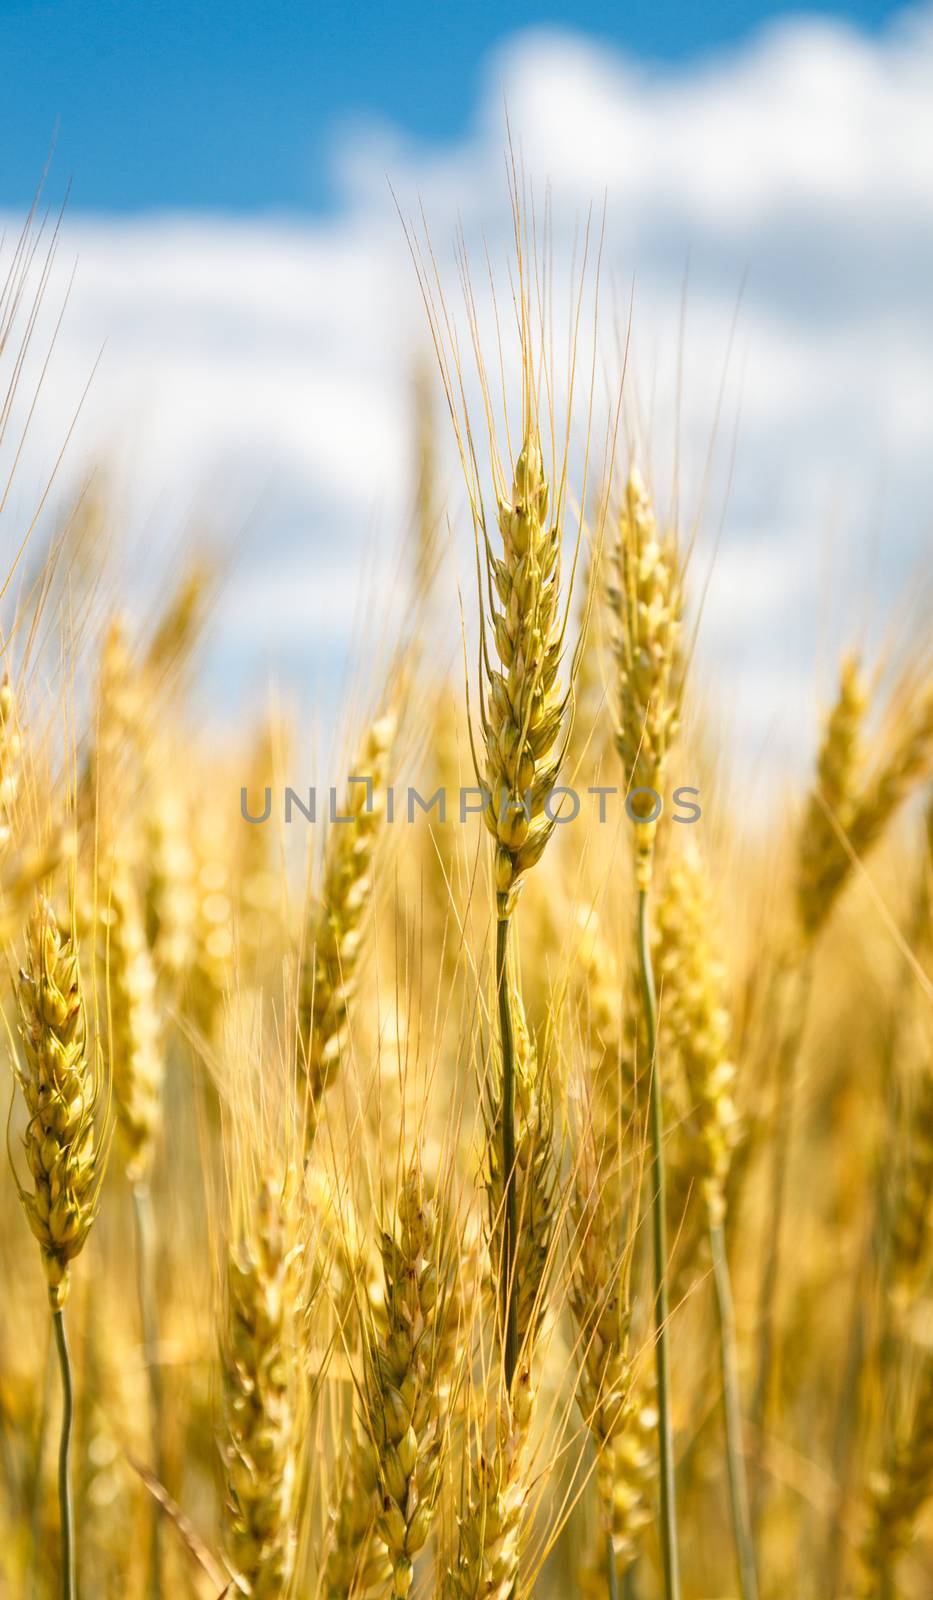 Close up view of wheat ear against blue sky